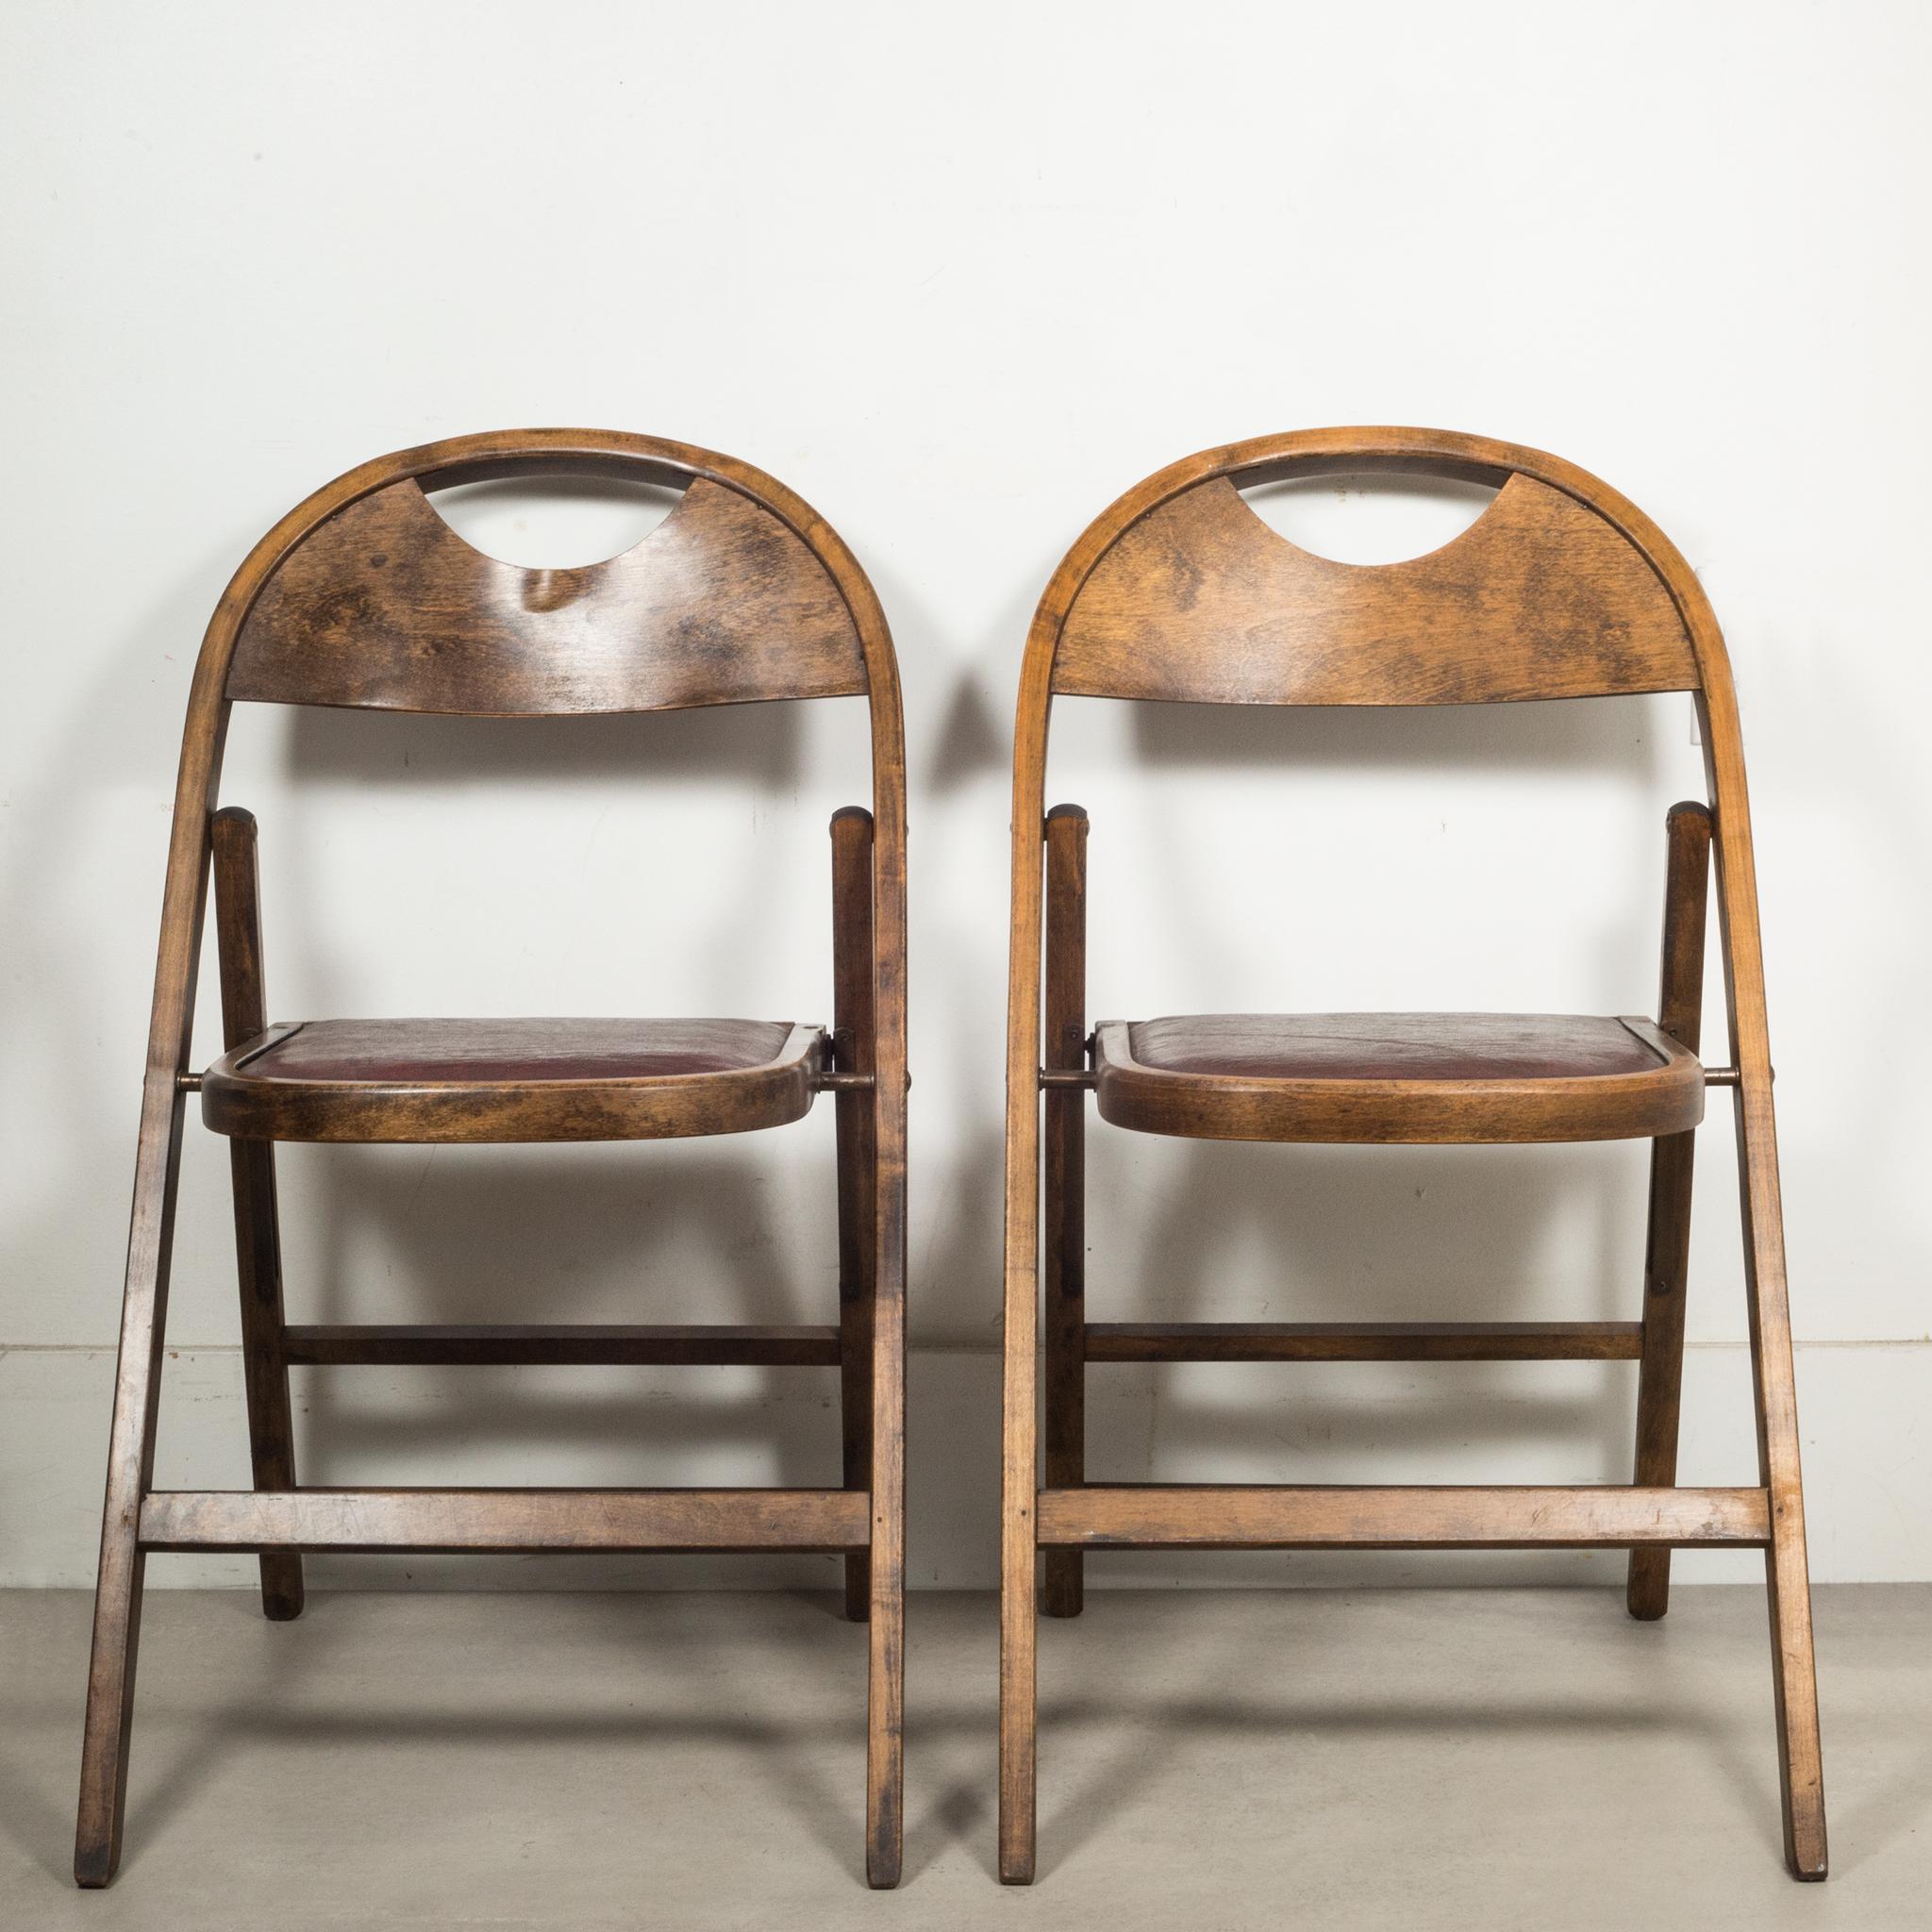 Industrial Late 19th C./Early 20th C. Antique Acme Folding Chairs C.1890-1910